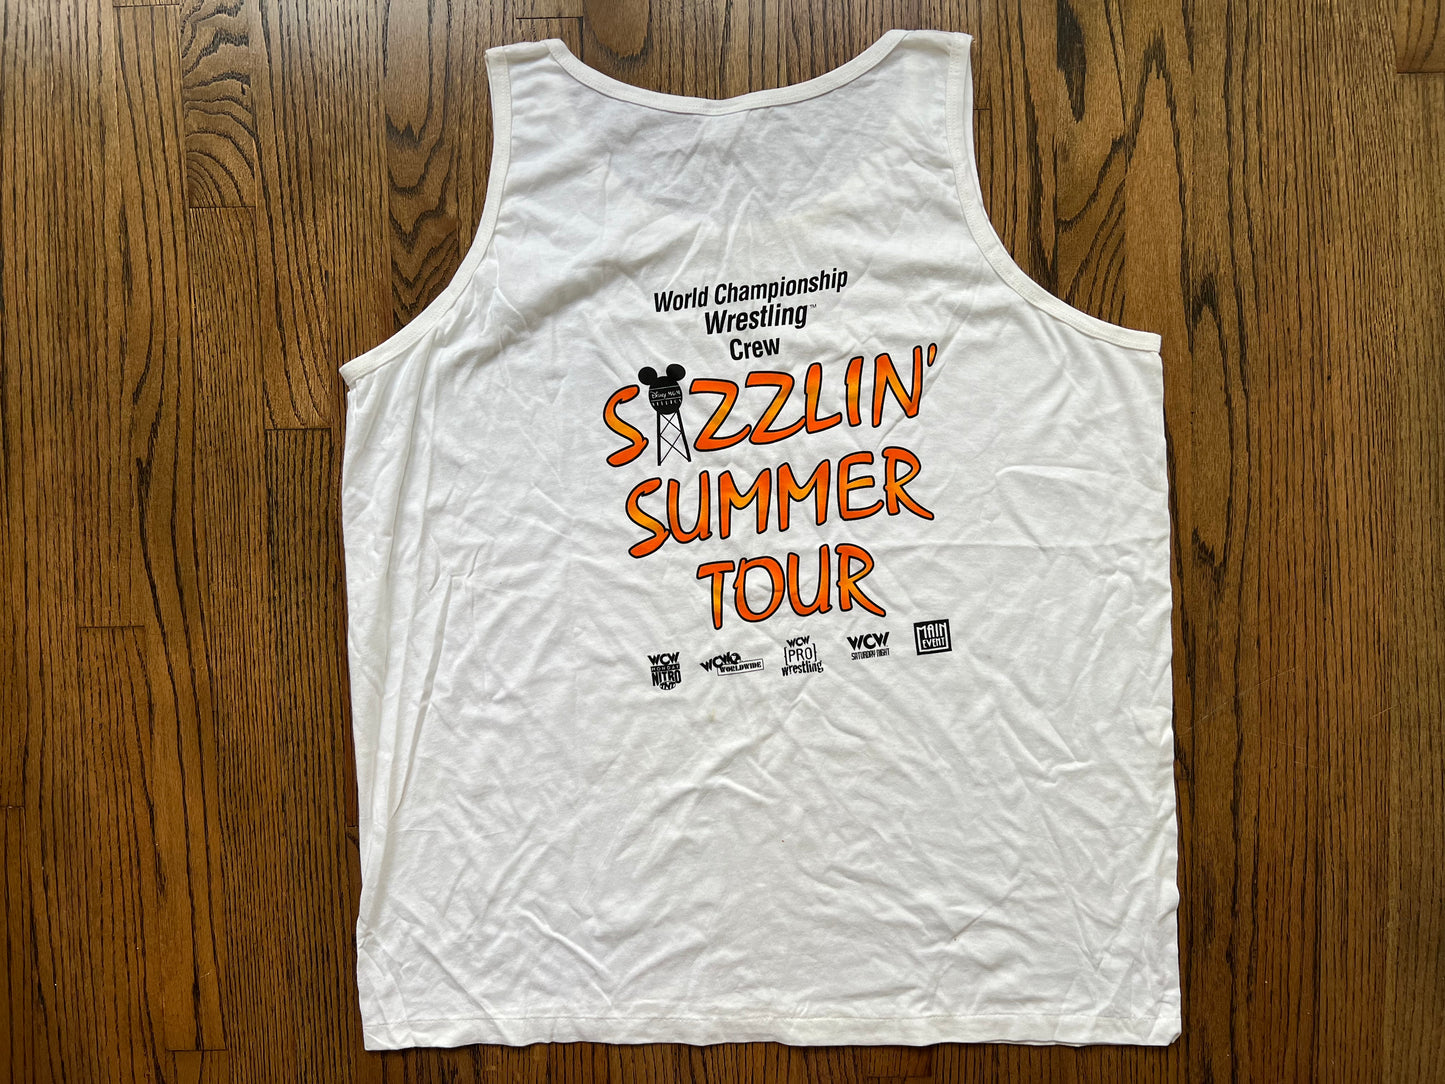 1995 WCW / Disney Studios Sizzlin Summer Tour two sided tank top from the personal collection of Nasty Boy Jerry Saggs